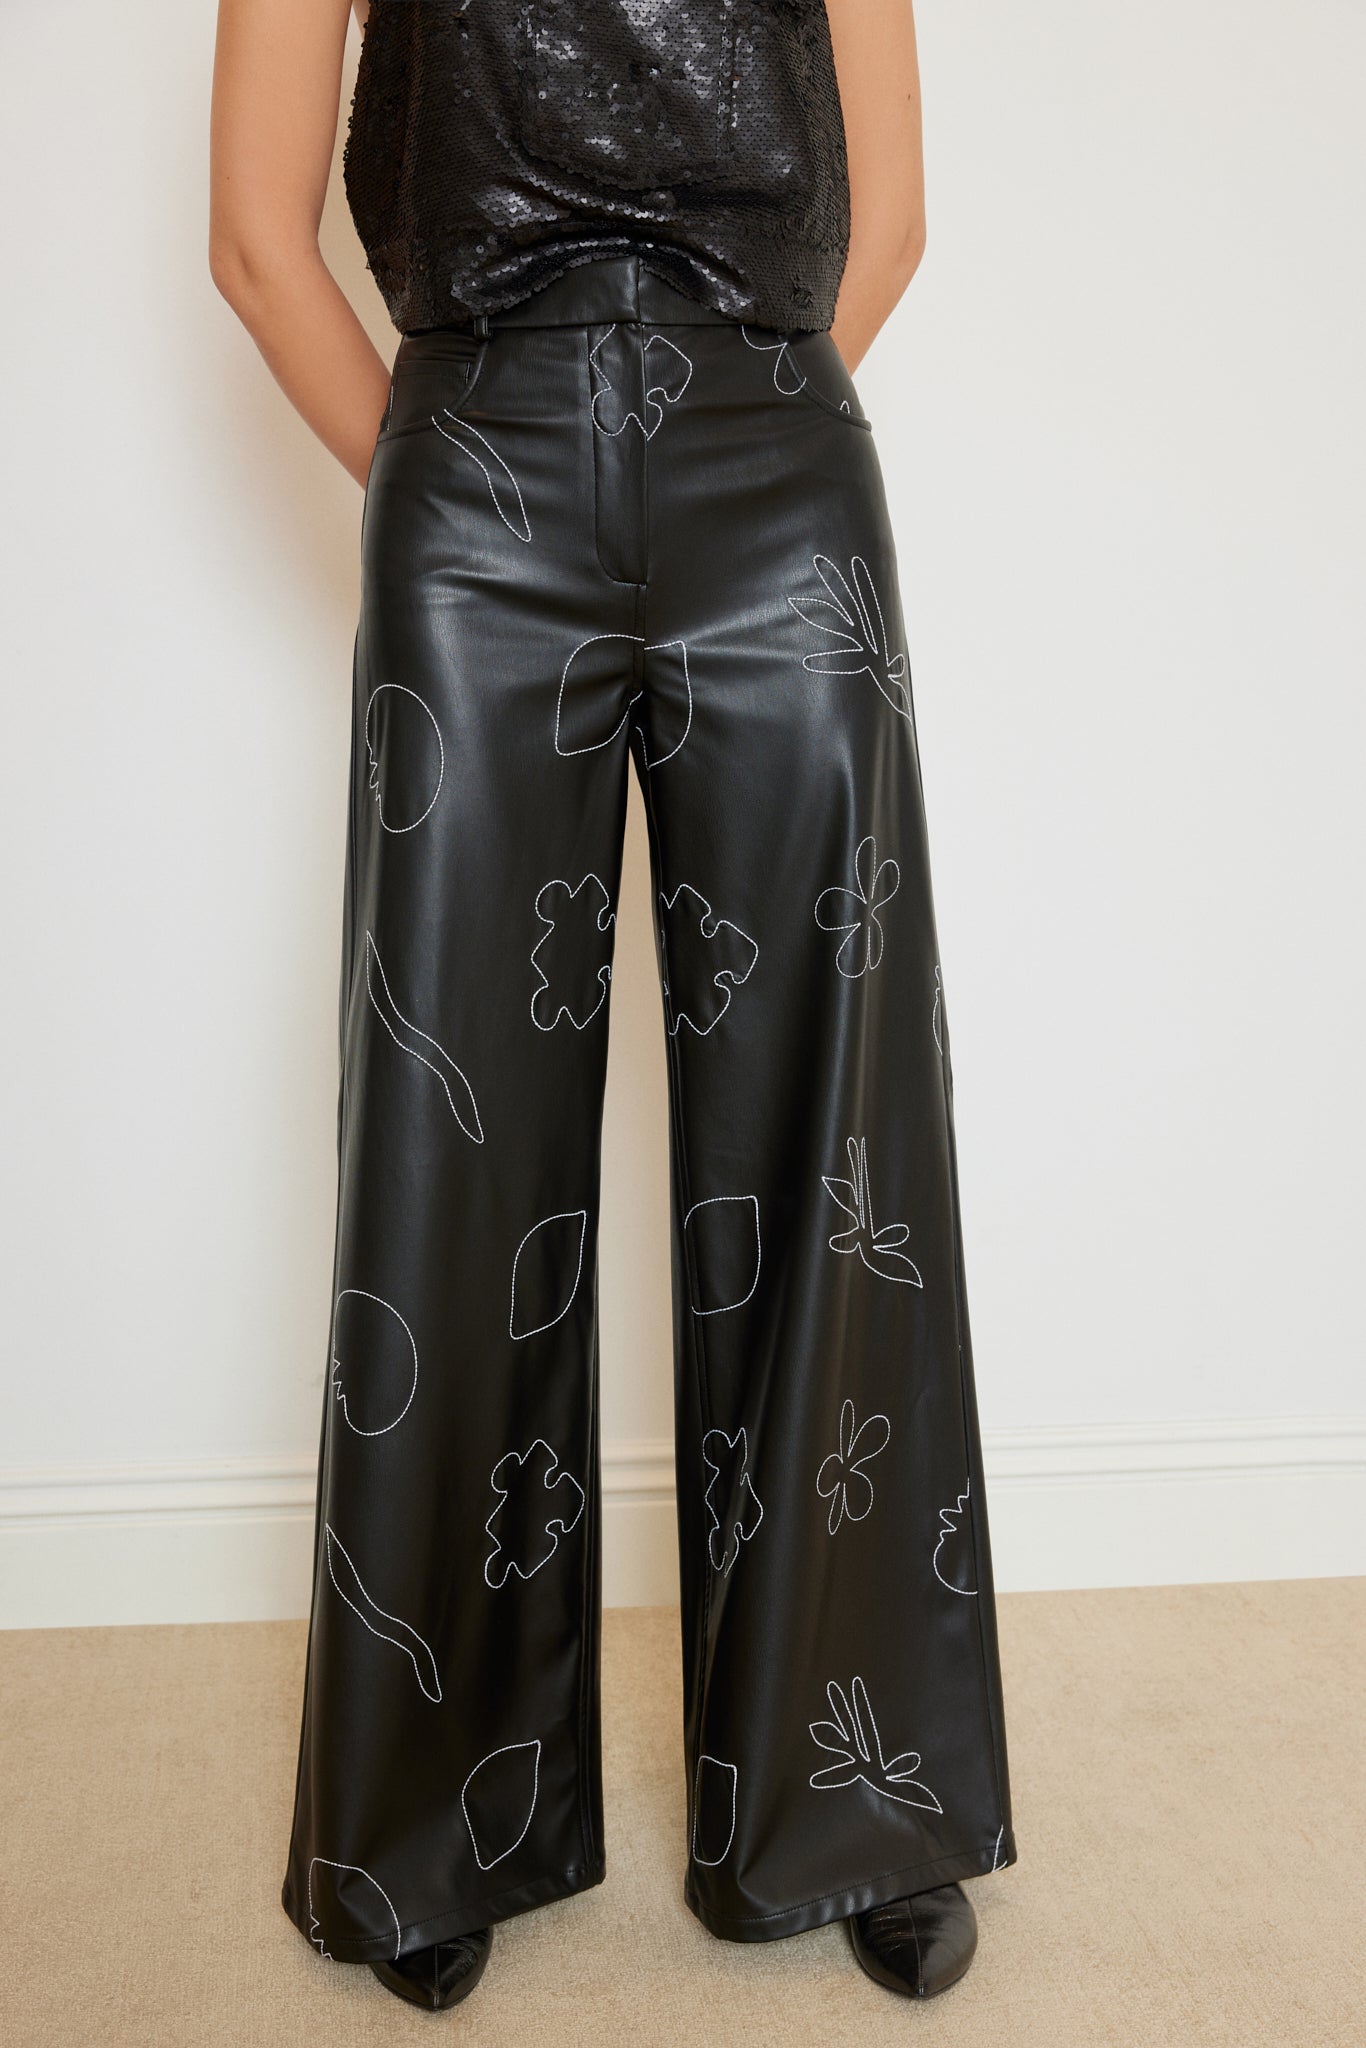 Flower Embroidery Vegan Leather Pants